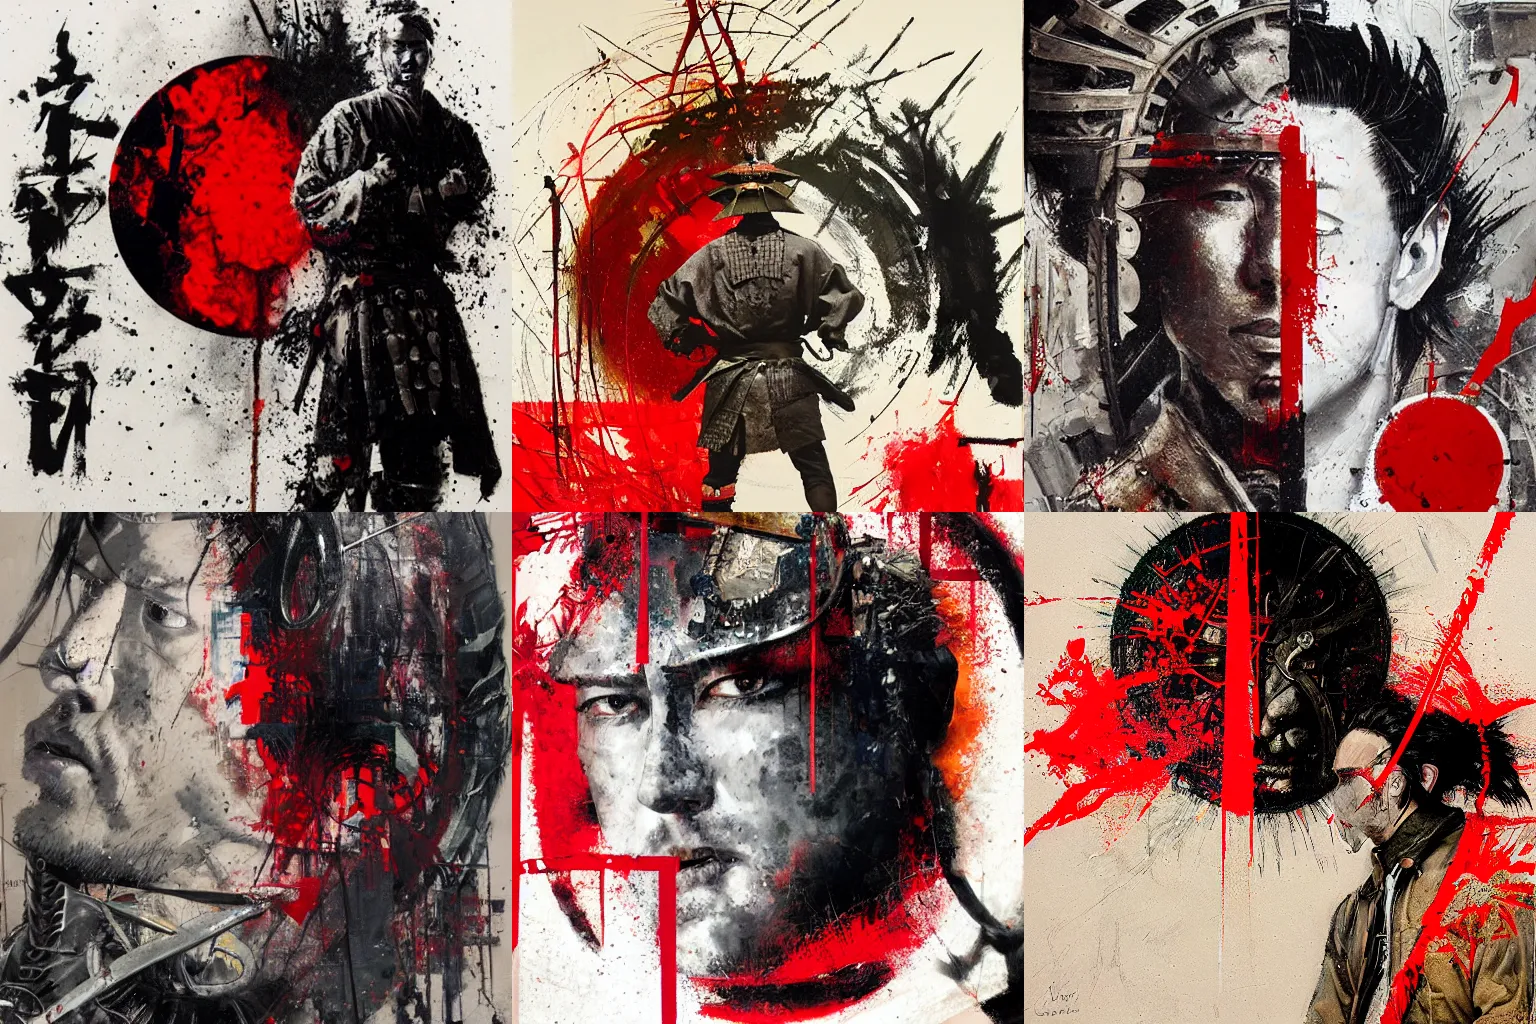 Prompt: artwork by Dean Cornwell and Russ Mills showing a samurai in front of a red circle